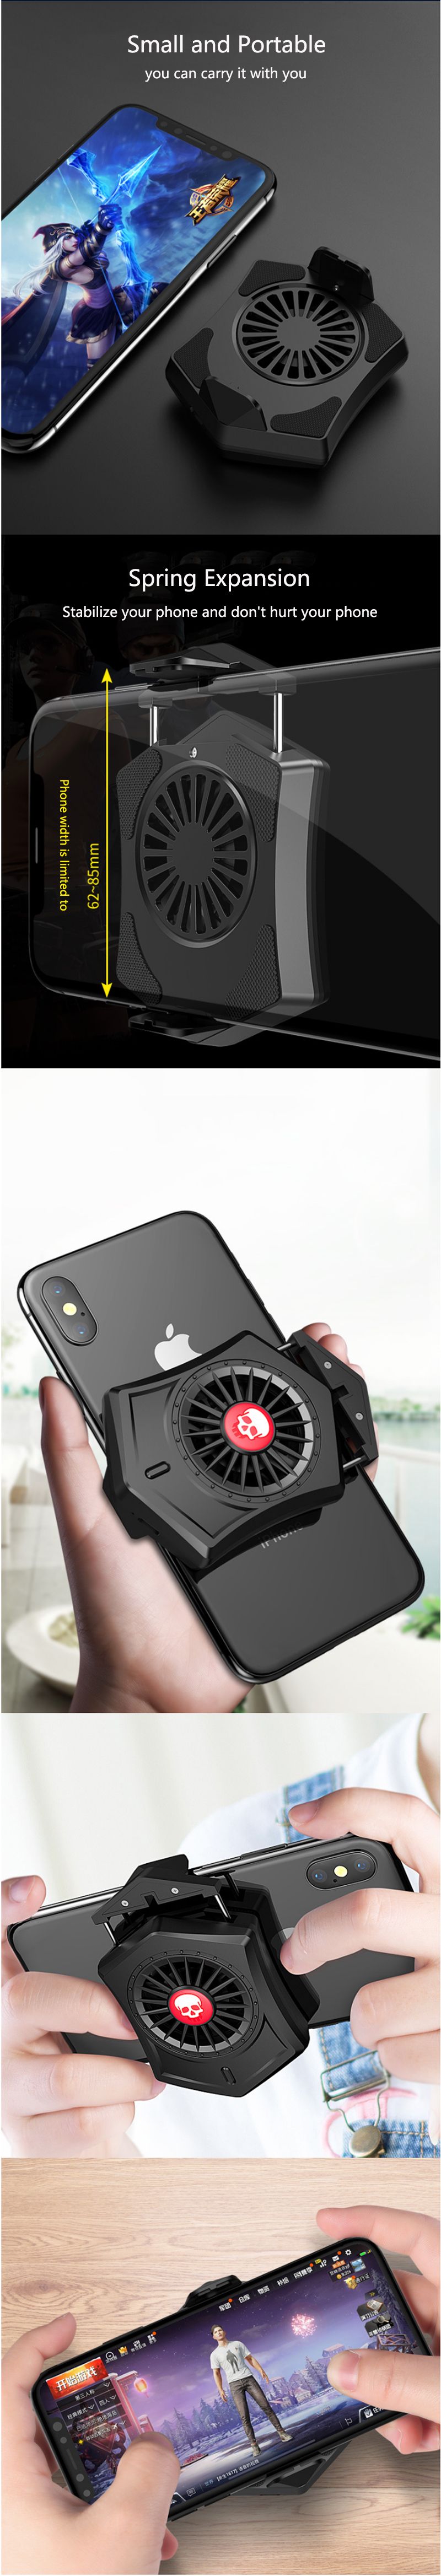 4000r-Per-Min-Game-Cooler-for-Cell-Phone-CPU-Cooling-Fan-for-PUBG-Mobile-Games-for-62-85mm-Width-Pho-1539671